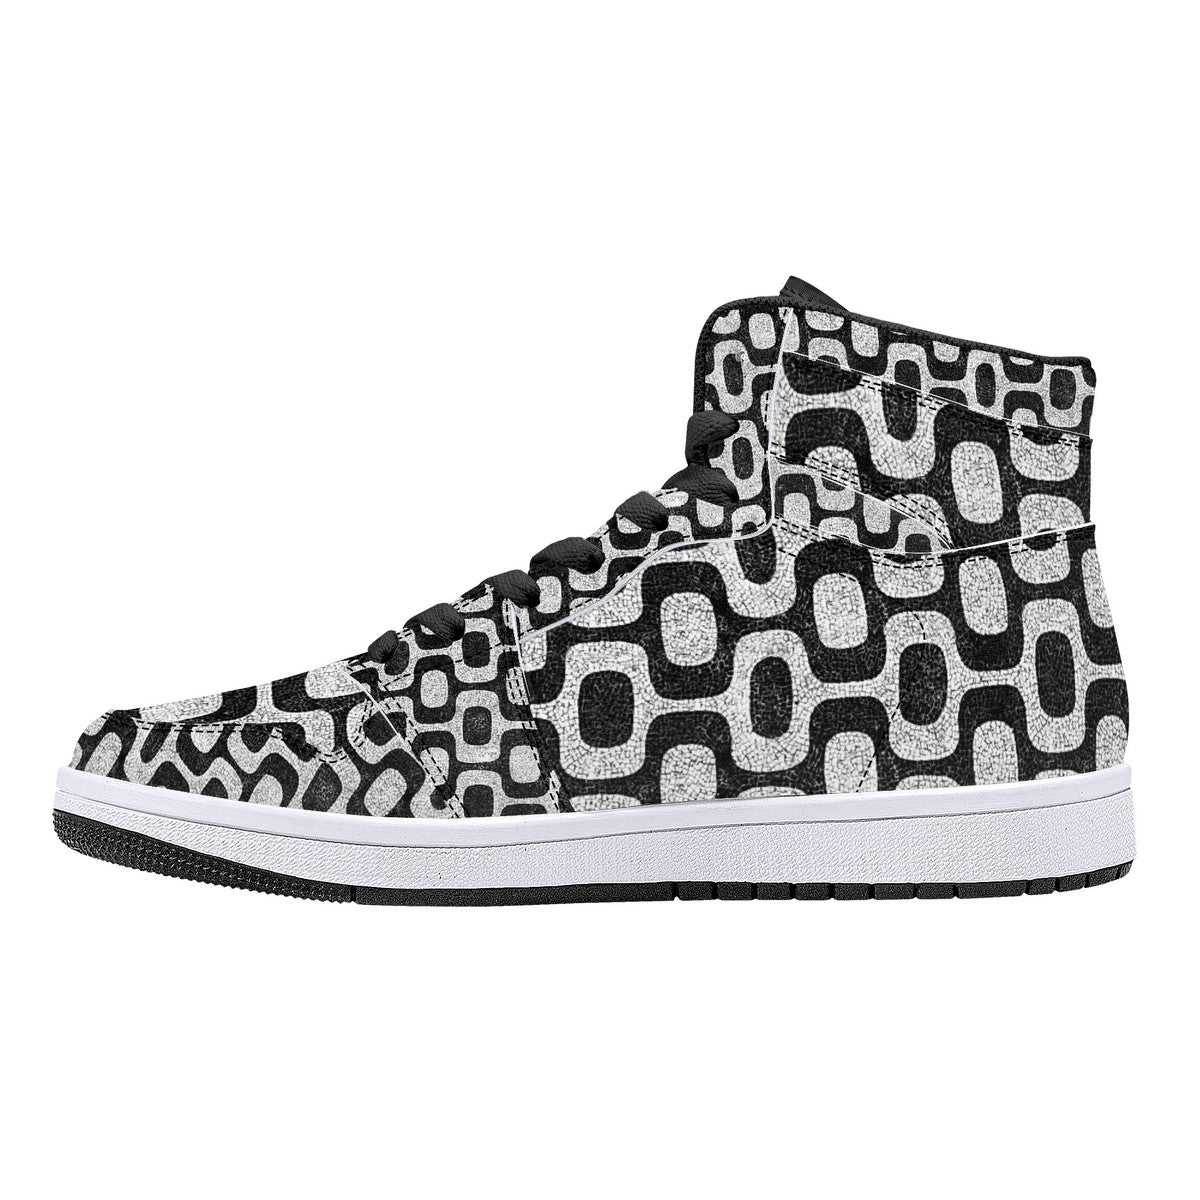 "Ipanema" High-Top Synthetic Leather Sneakers